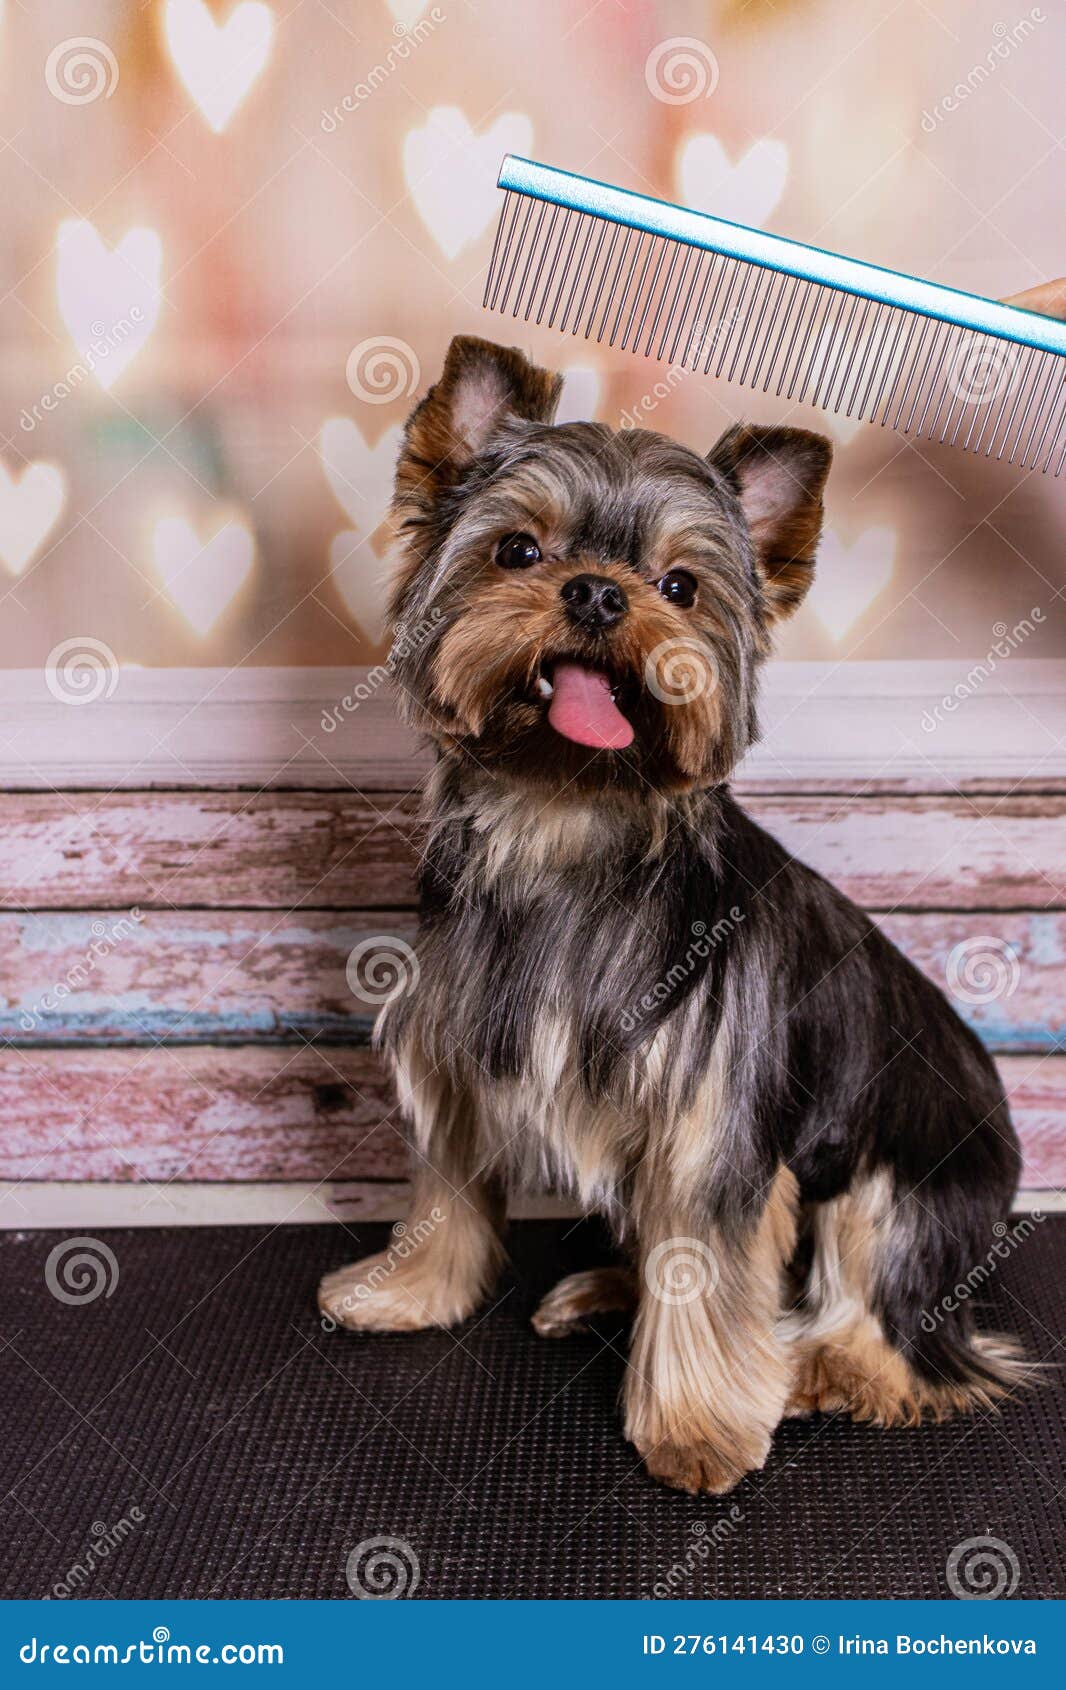 A Trimmed Yorkshire Terrier Sits on a Table Stock Photo - Image of hair ...